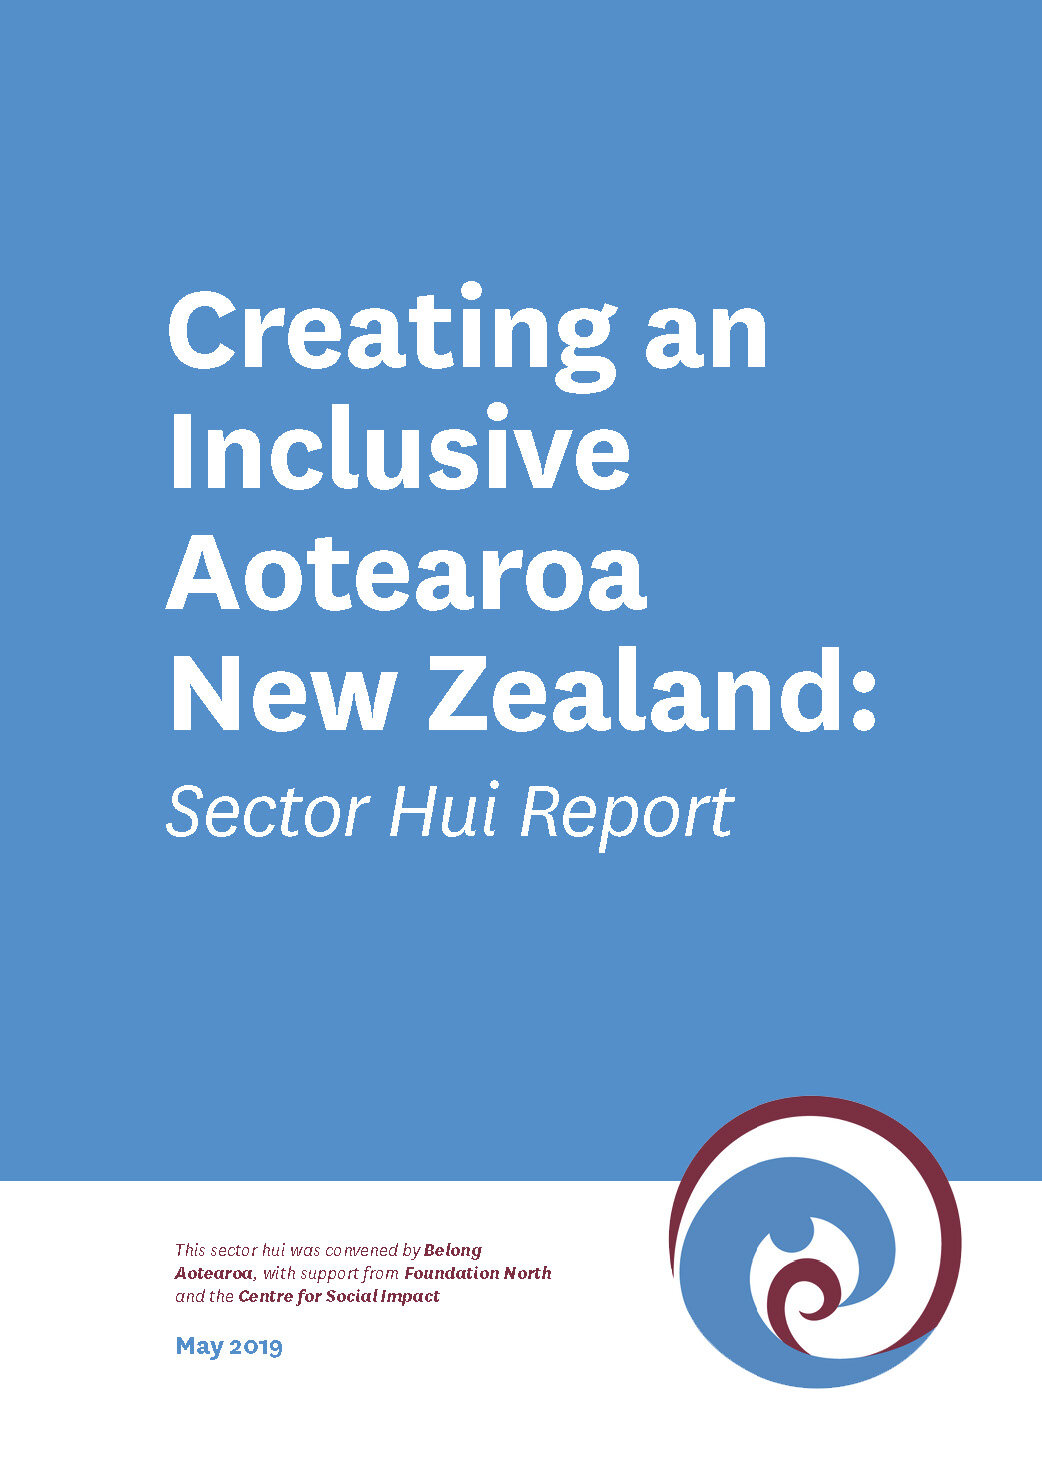 Creating an Inclusive New Zealand: Sector Hui Report